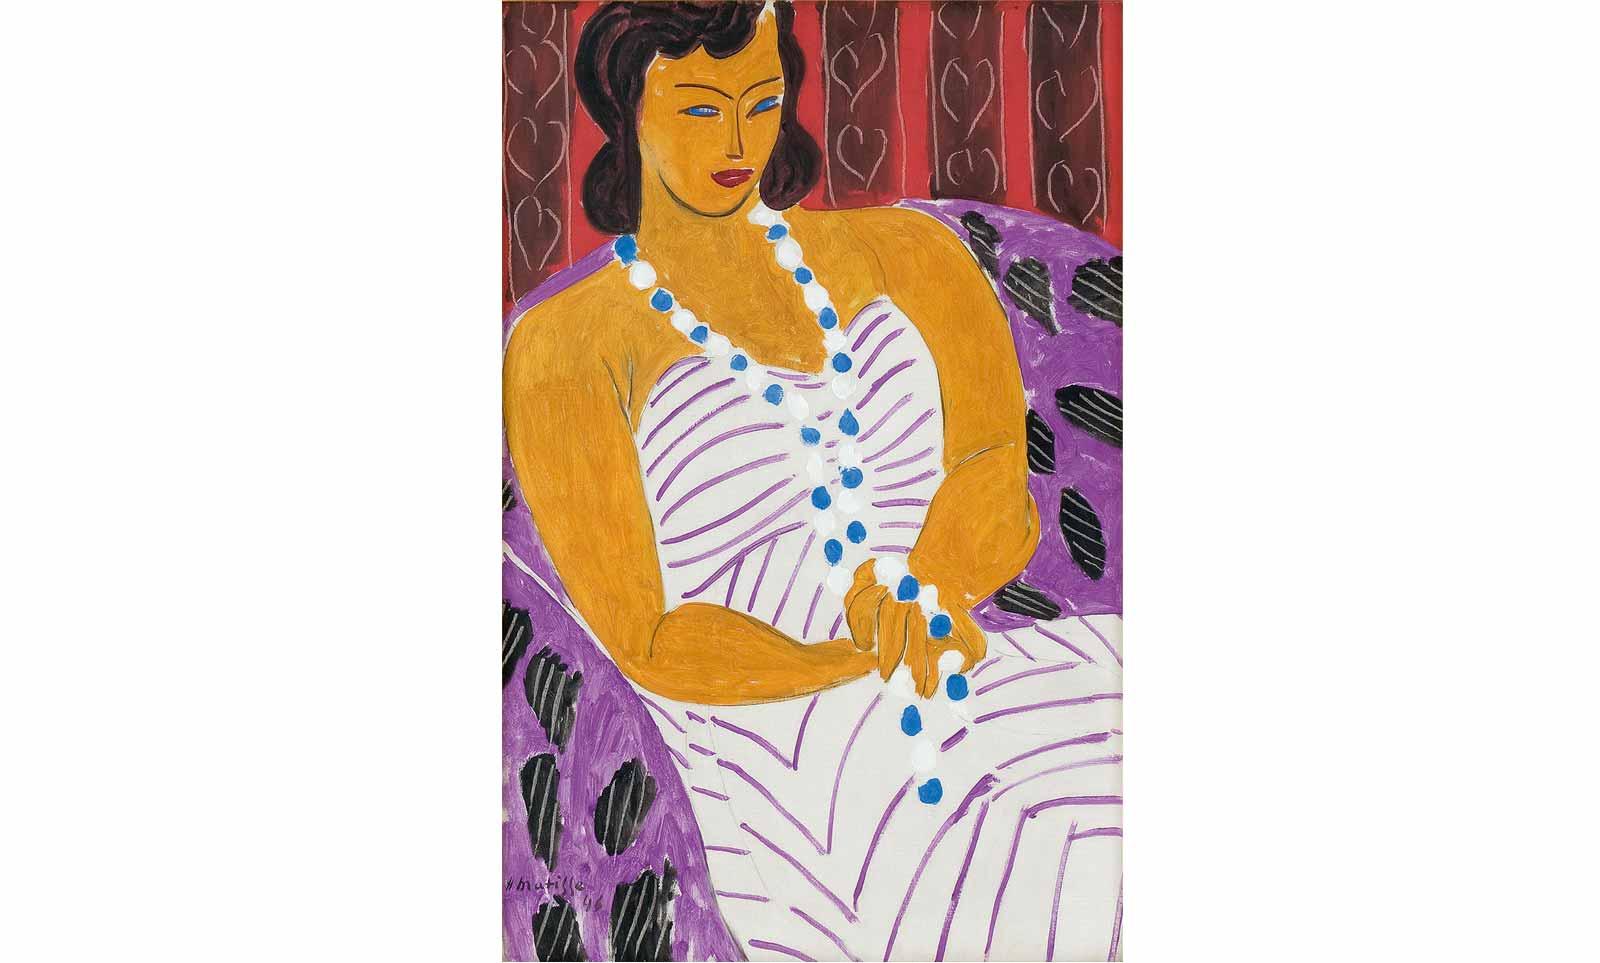 Henri Matisse (1869-1954), Lady with white dress (woman in white), 1946